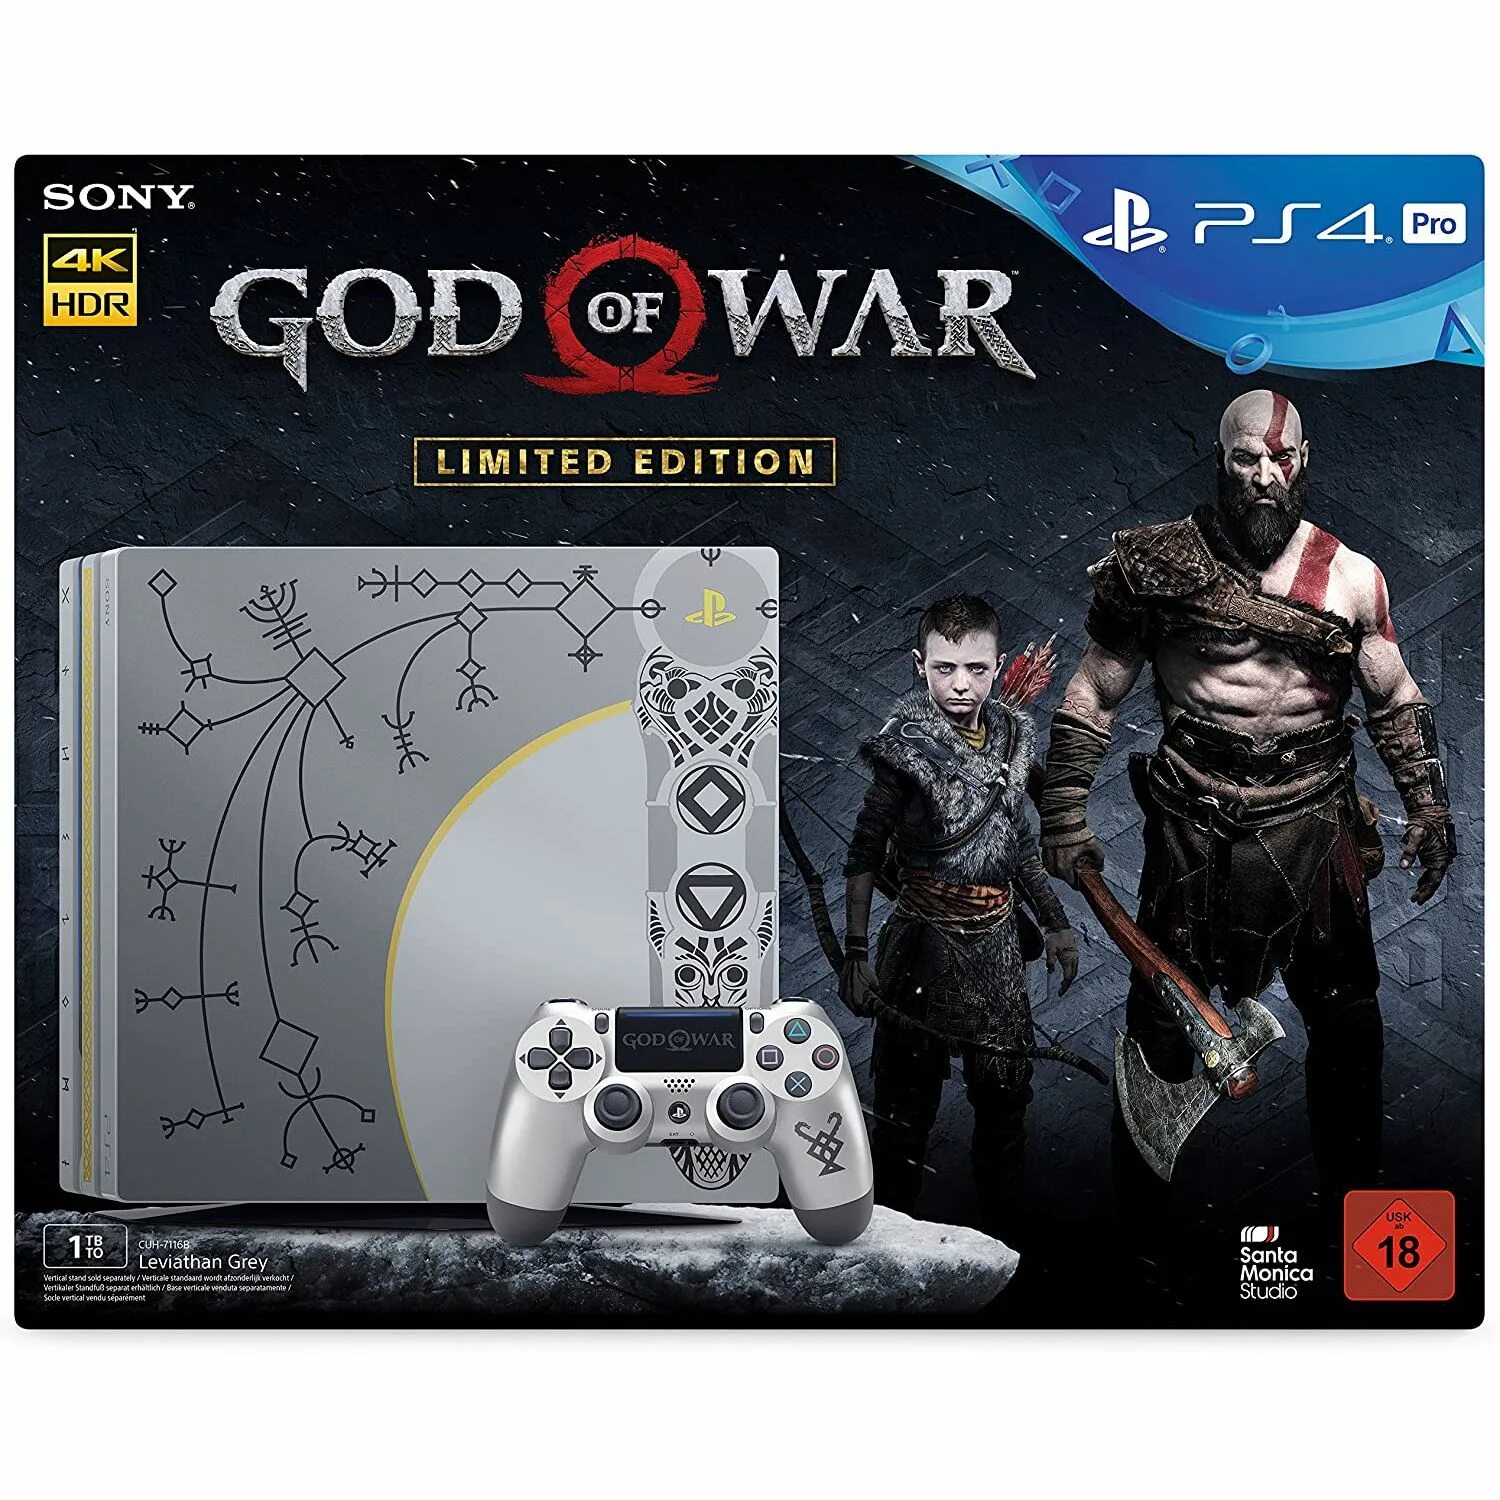 Wars limited. Sony ps4 Pro Limited Edition.